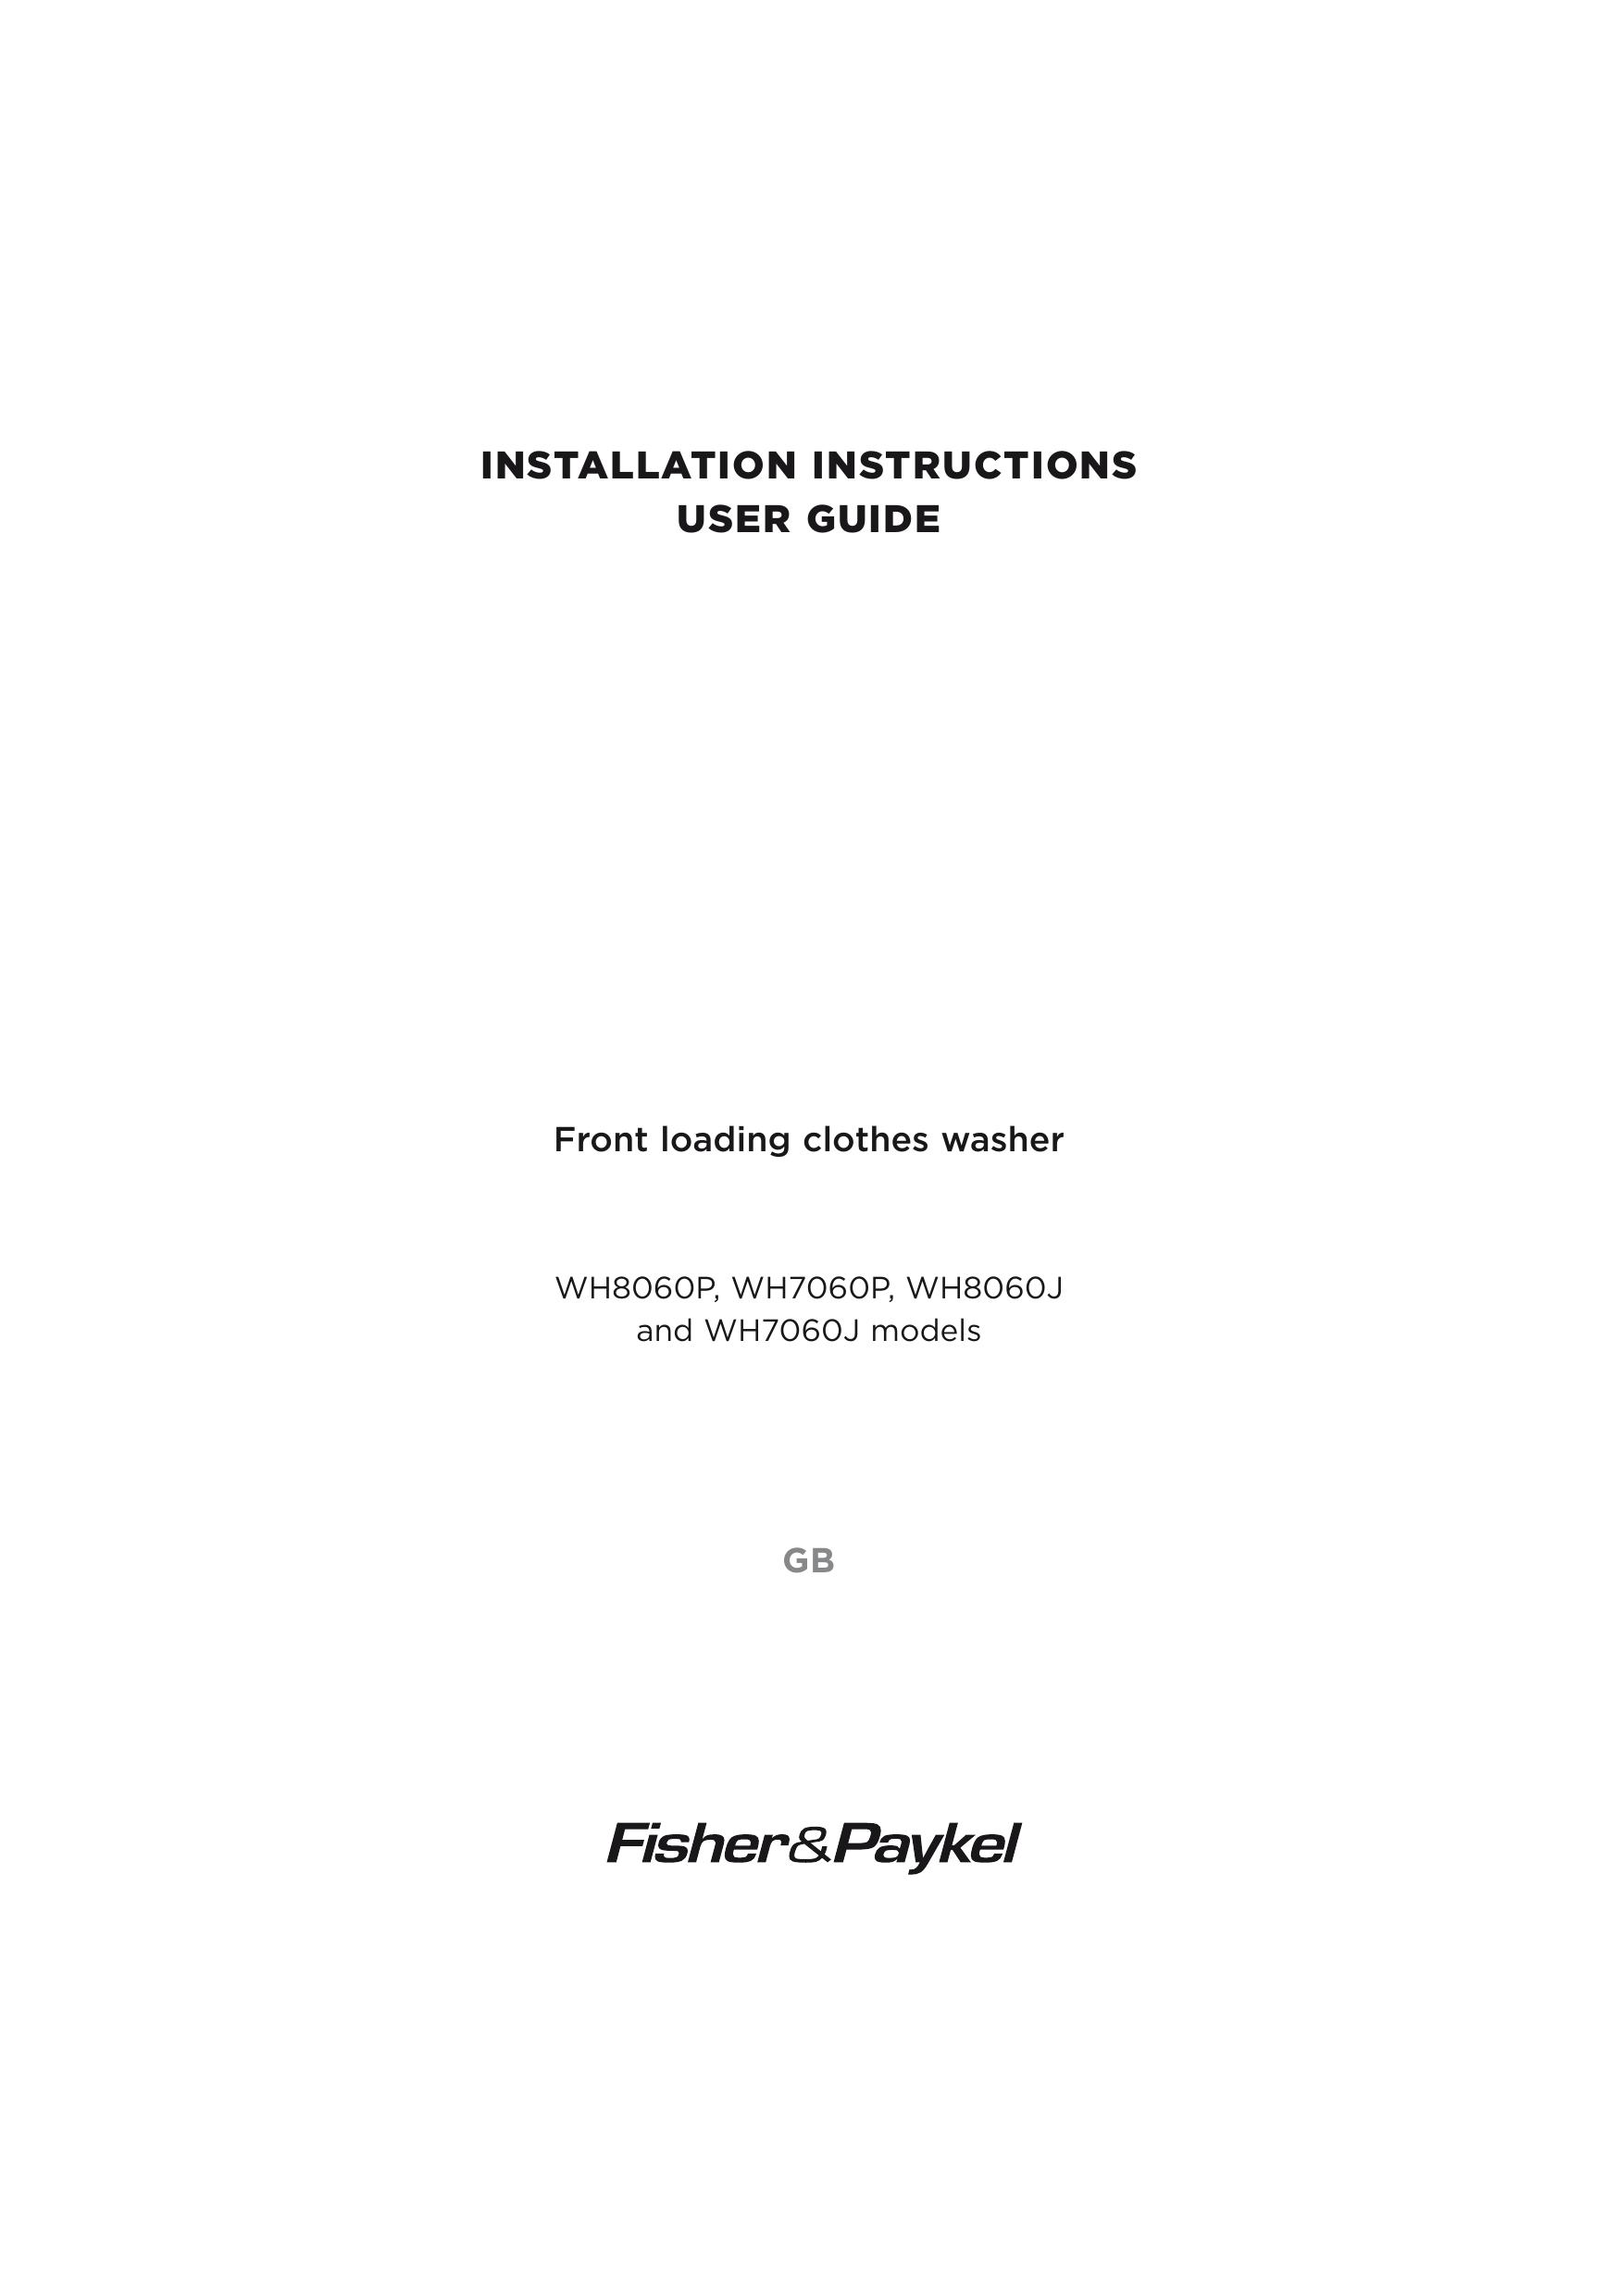 Fisher & Paykel WH7060J Washer User Manual